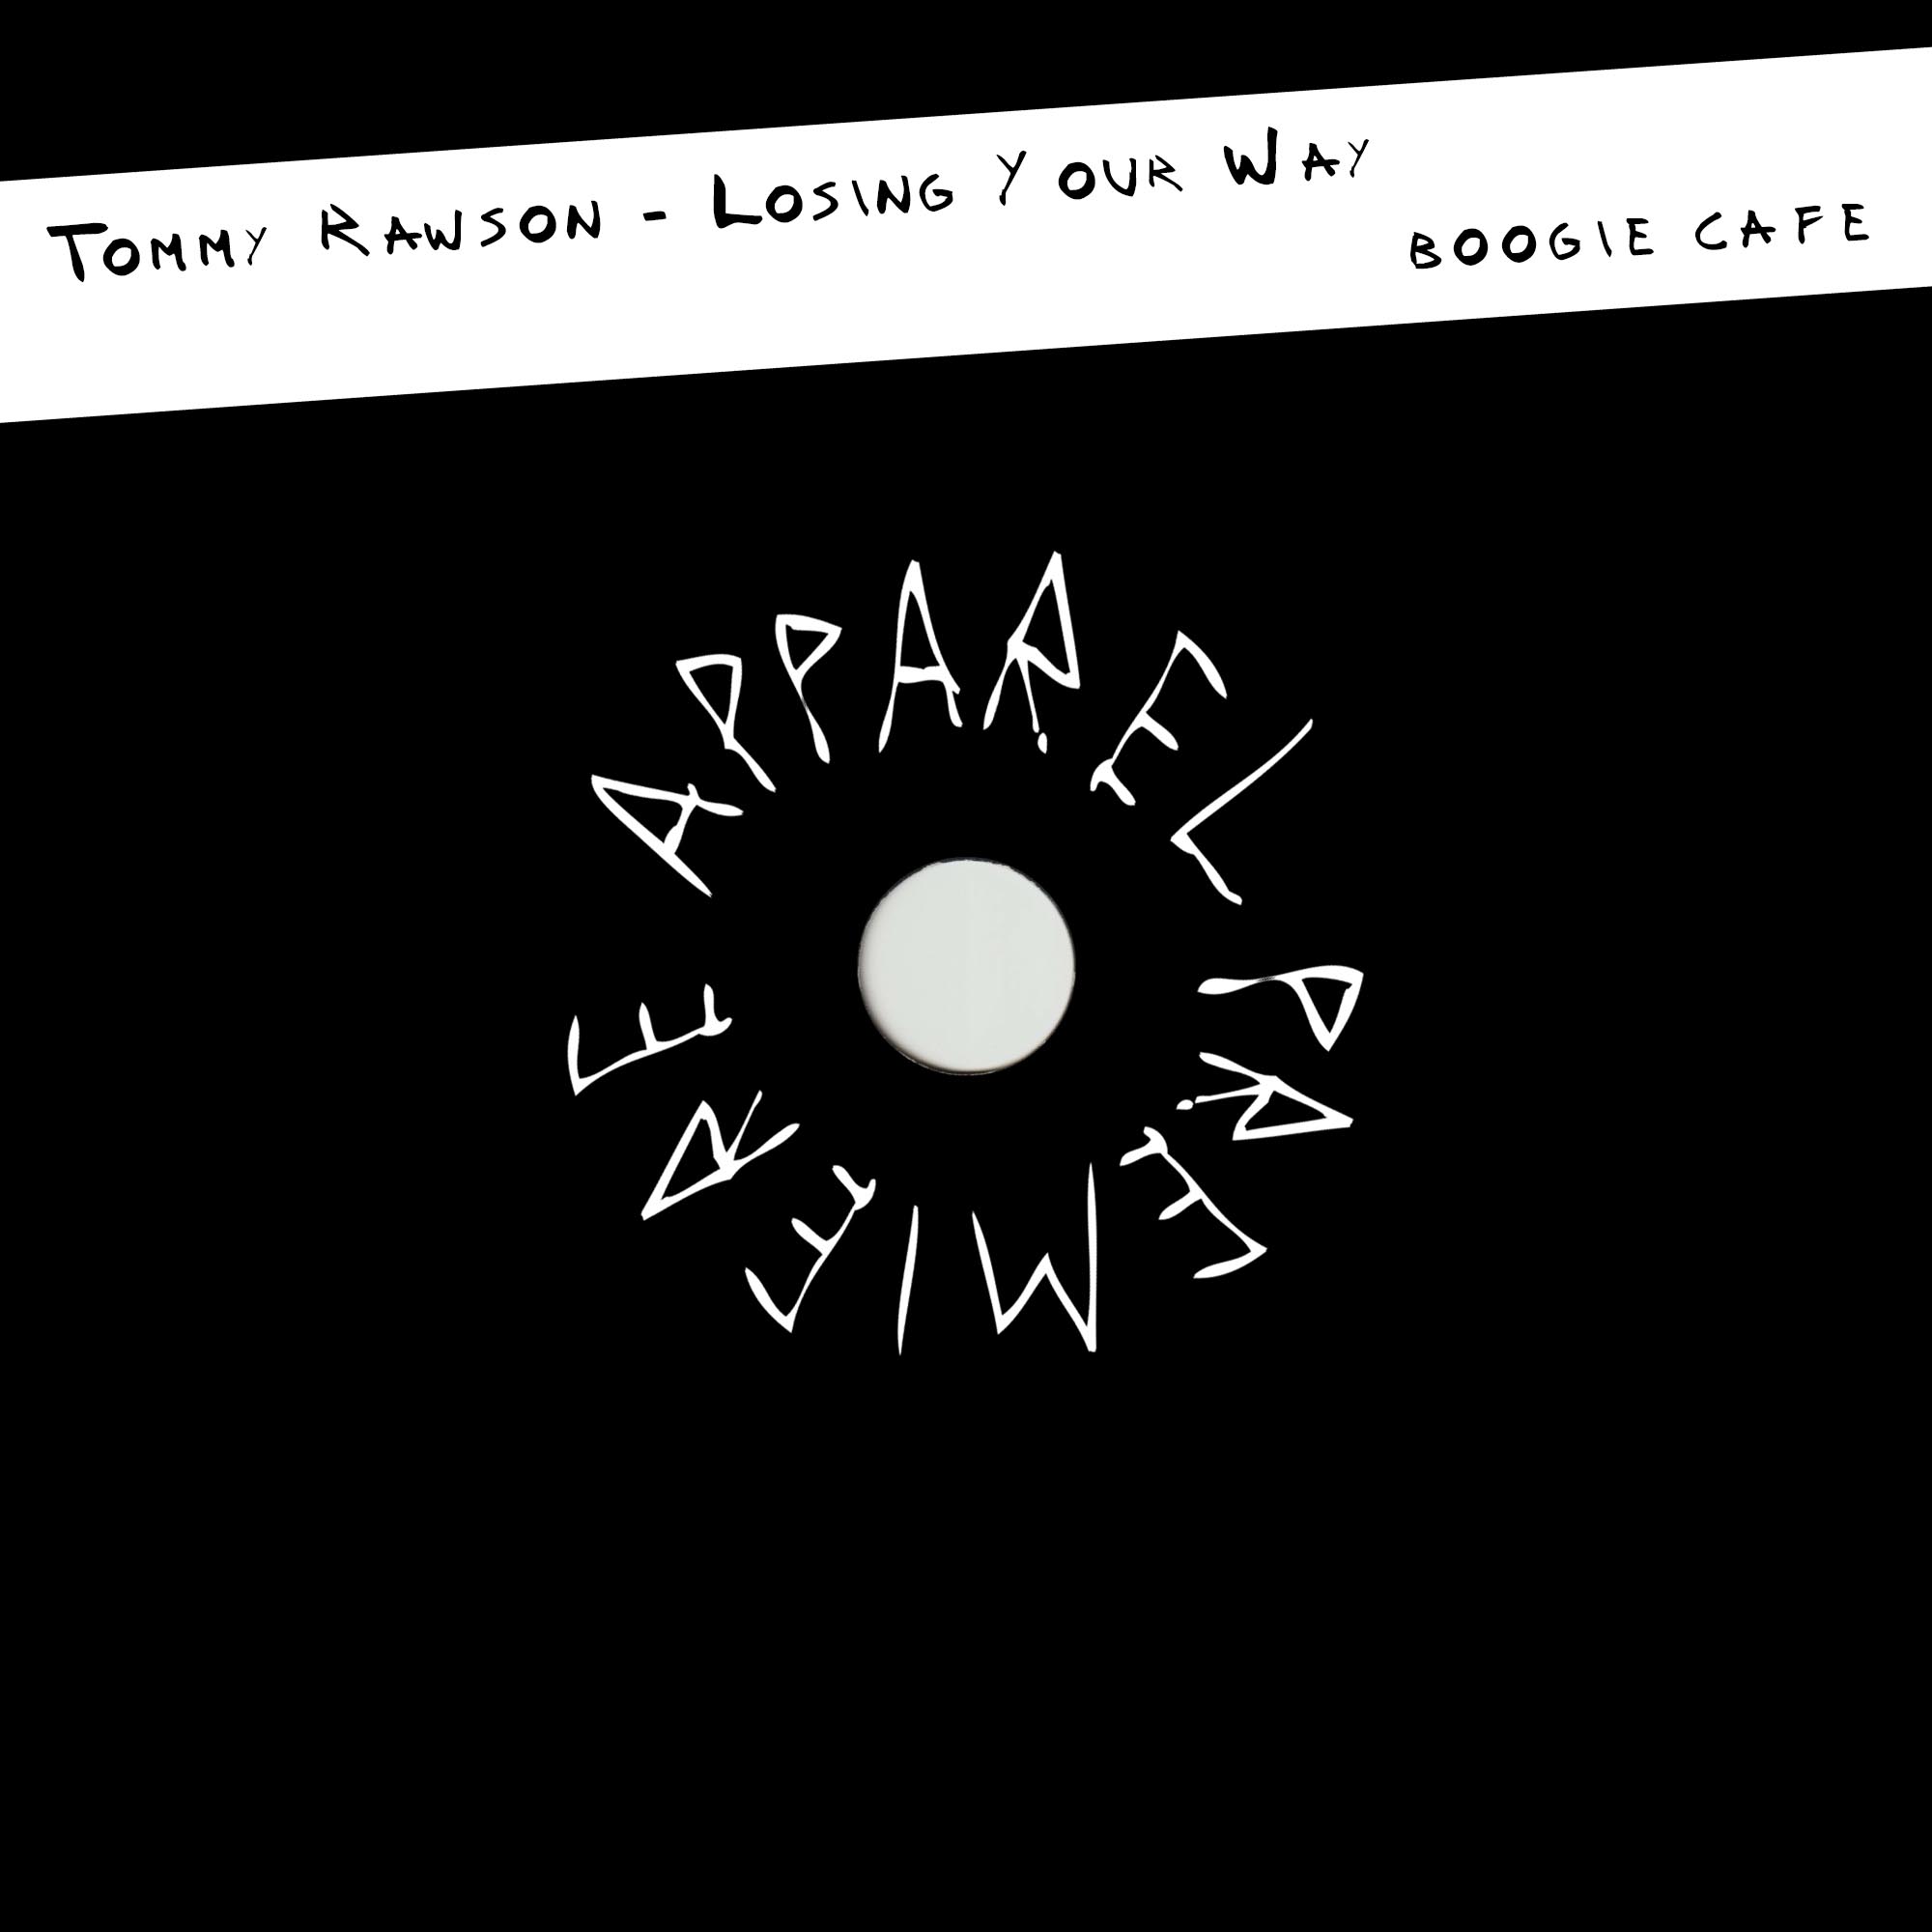 APPAREL PREMIERE Tommy Rawson – Losing Your Way [Boogie Cafe]